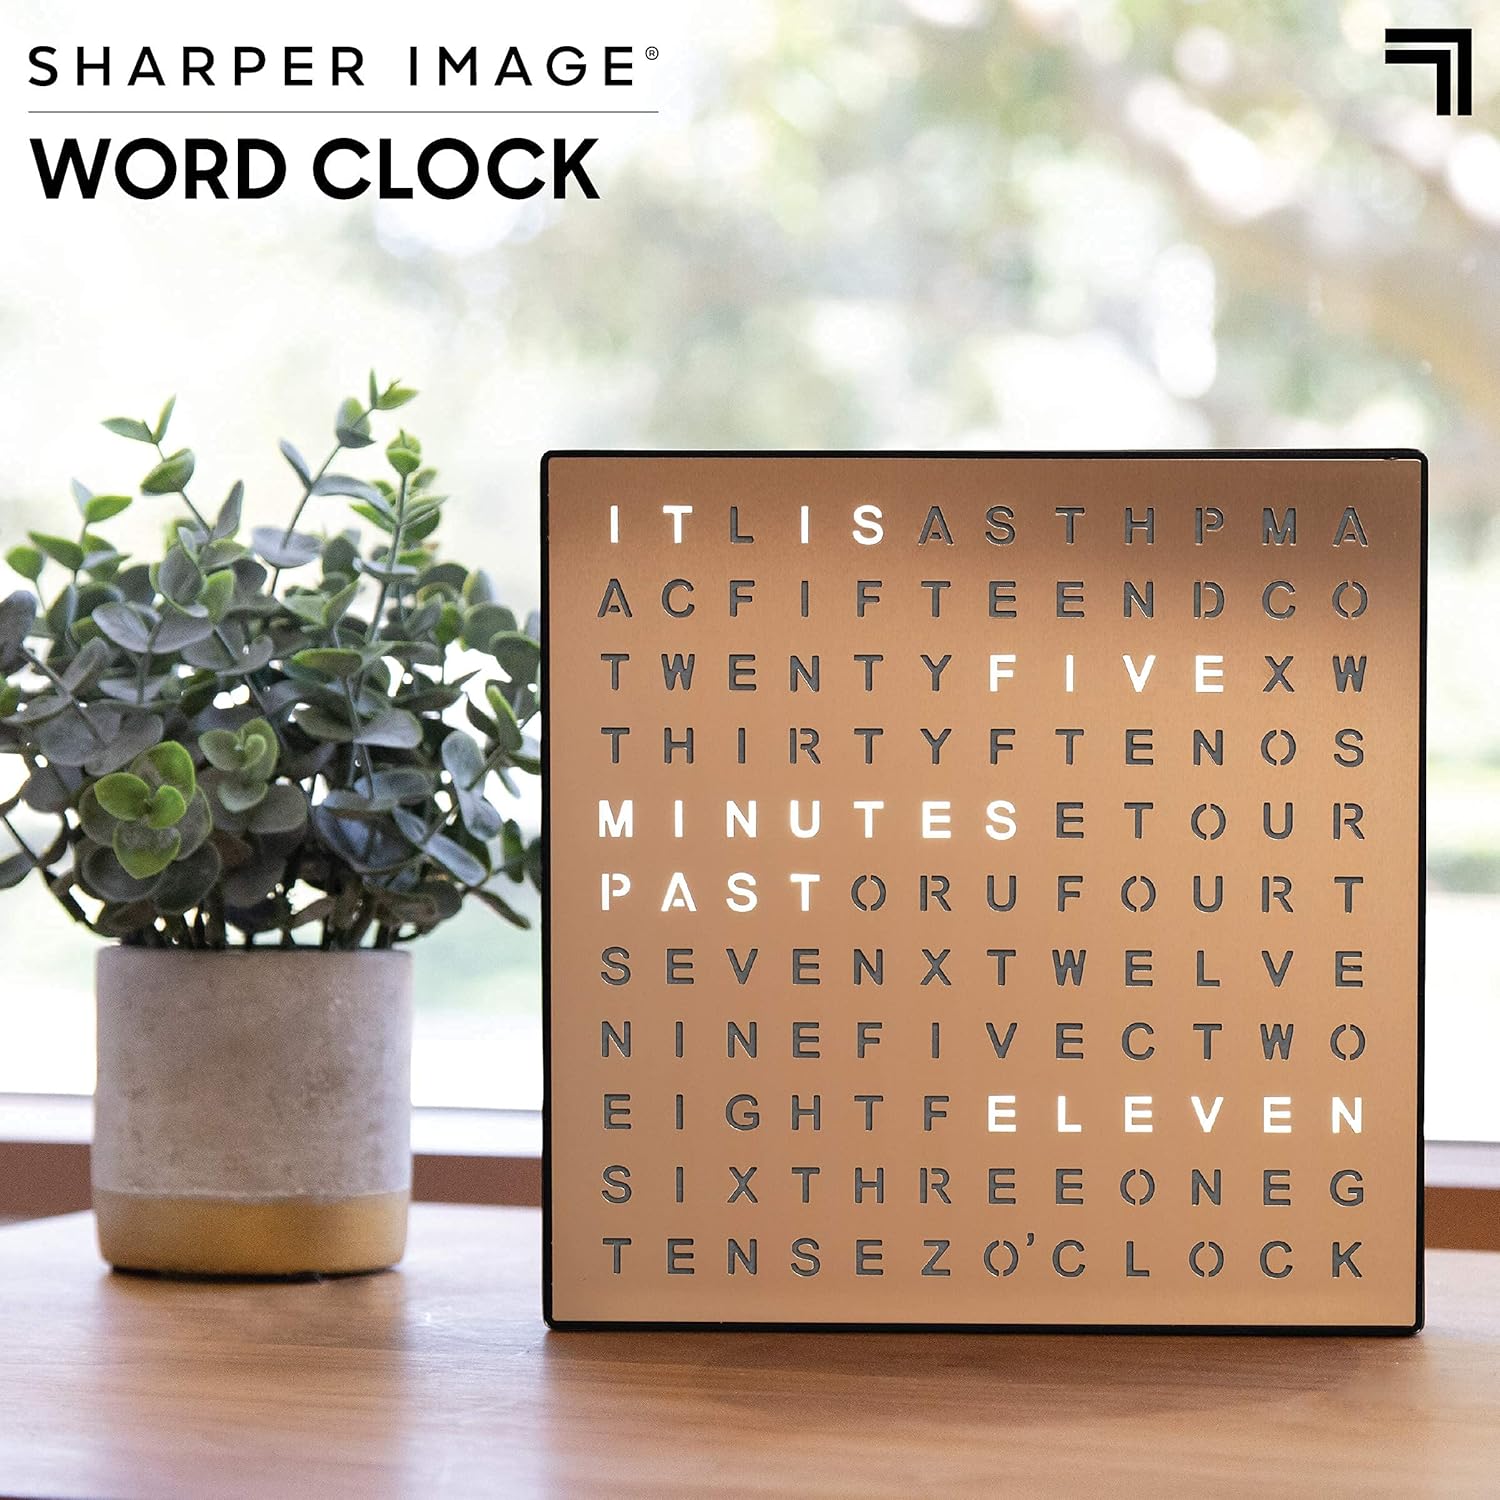 SHARPER Modern Beautiful Word Clock - Unique Contemporary Home and Office Decor - Cool Gadget For Desk and Wall